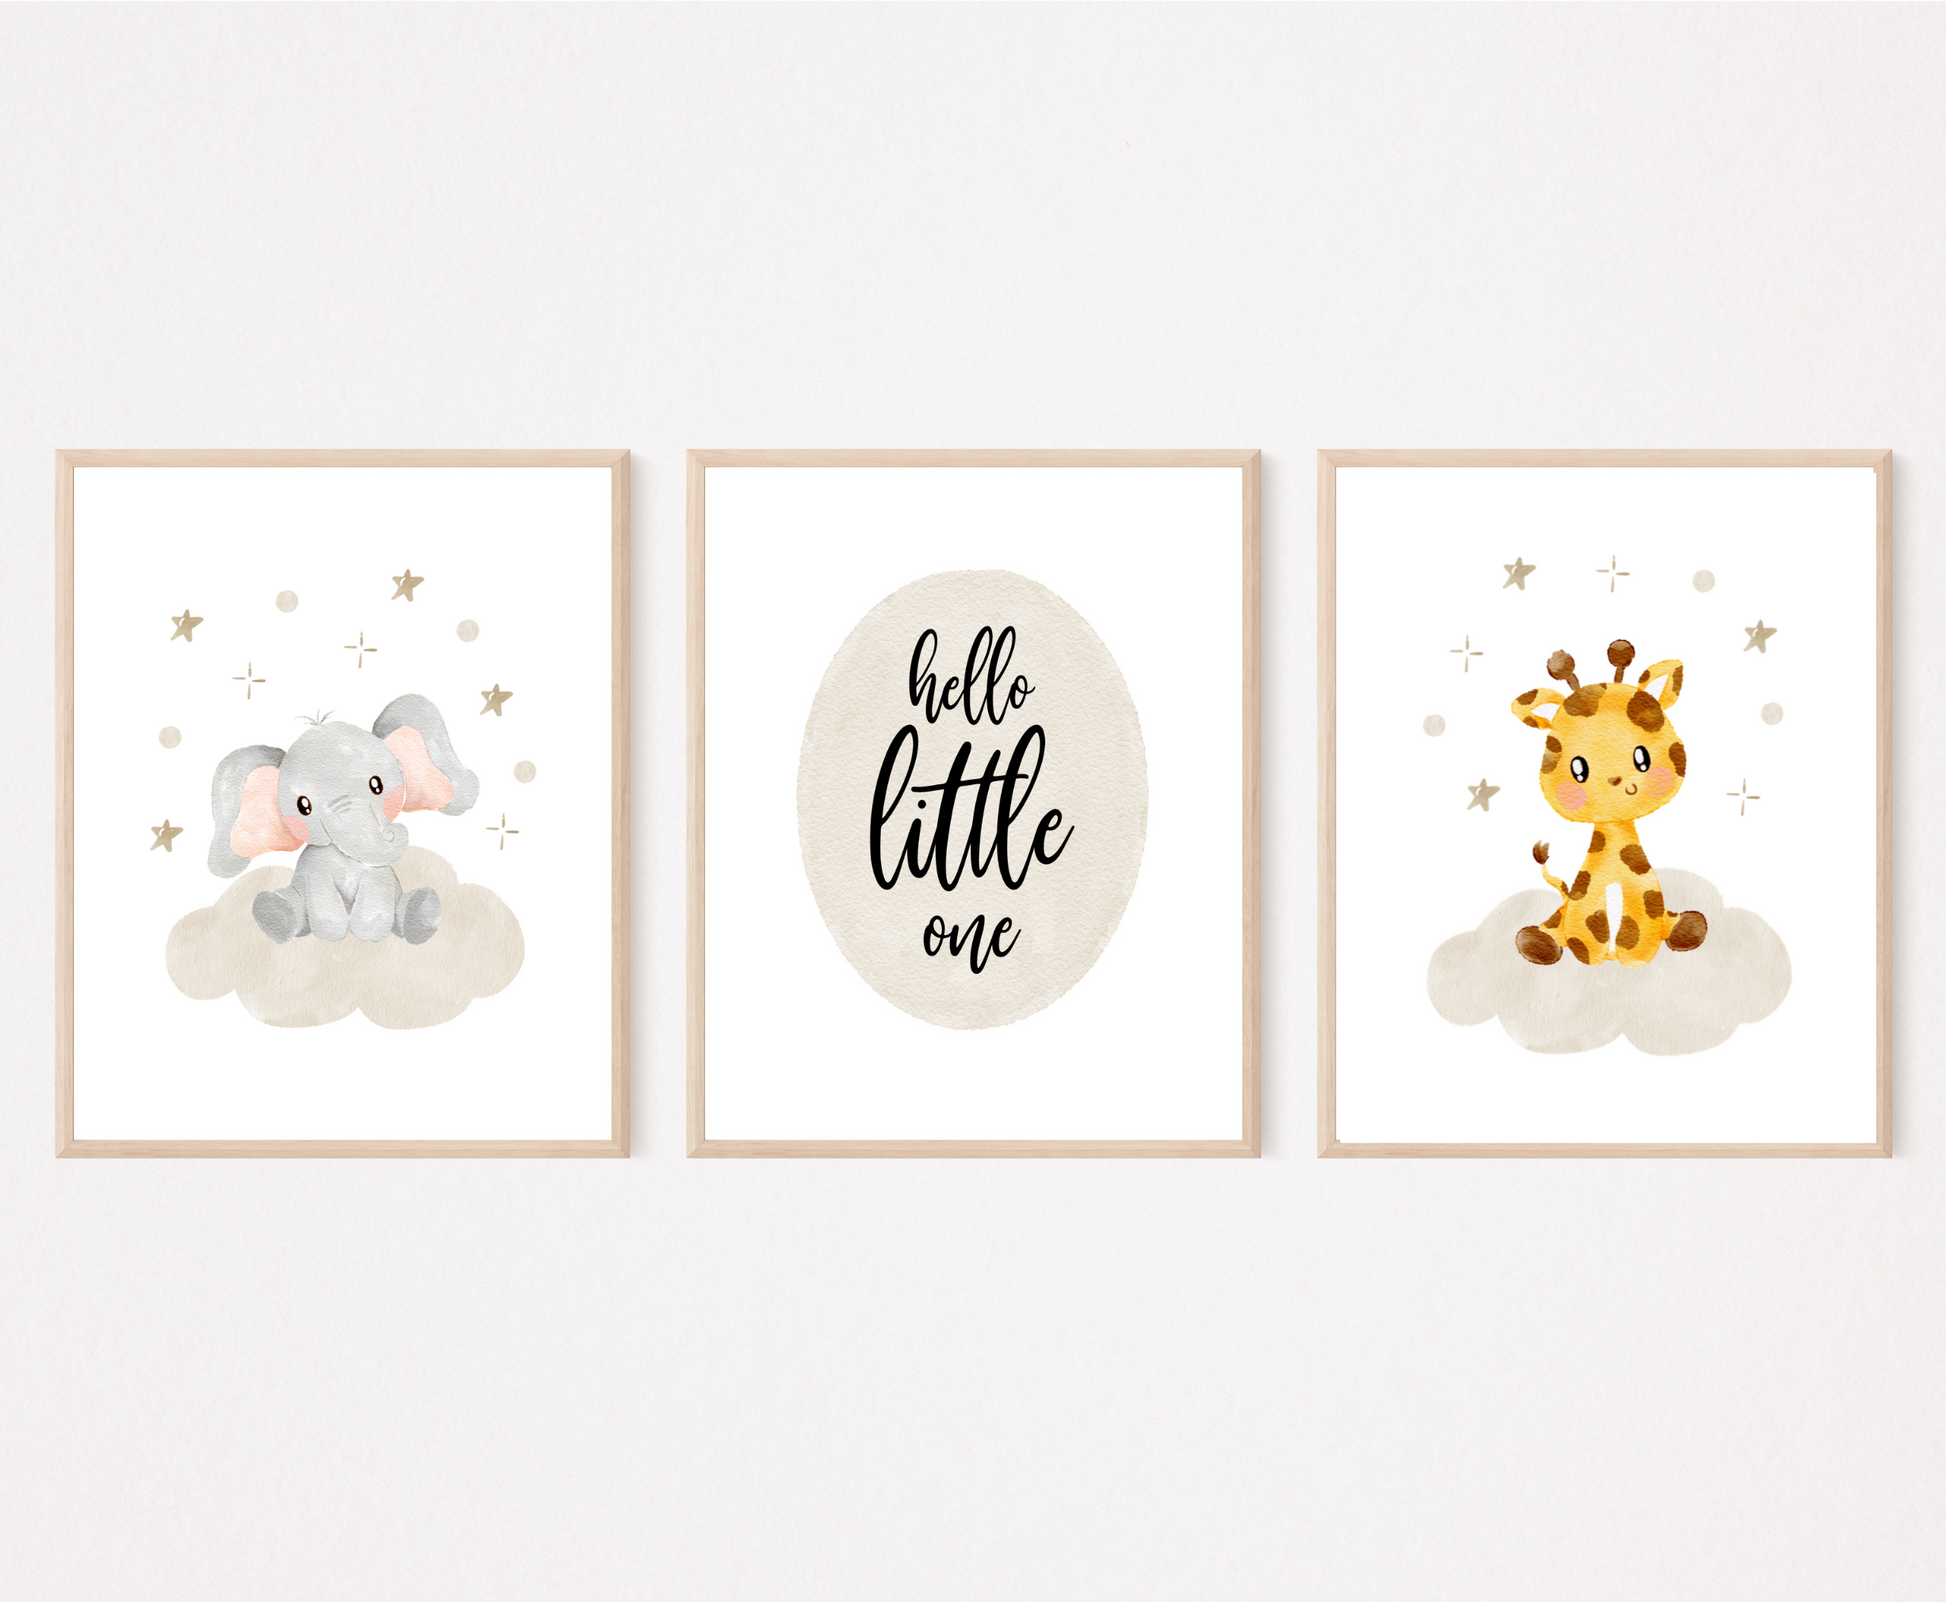 A picture of three digital printable graphics. The first one shows a graphic of a grey baby elephant sitting on a grey cloud with mini stars surrounding its head. The middle one has a piece of writing inside a grey oval shape that says “Hello little one”. The last one shows a cute baby giraffe sitting on a grey cloud with mini stars surrounding its head.